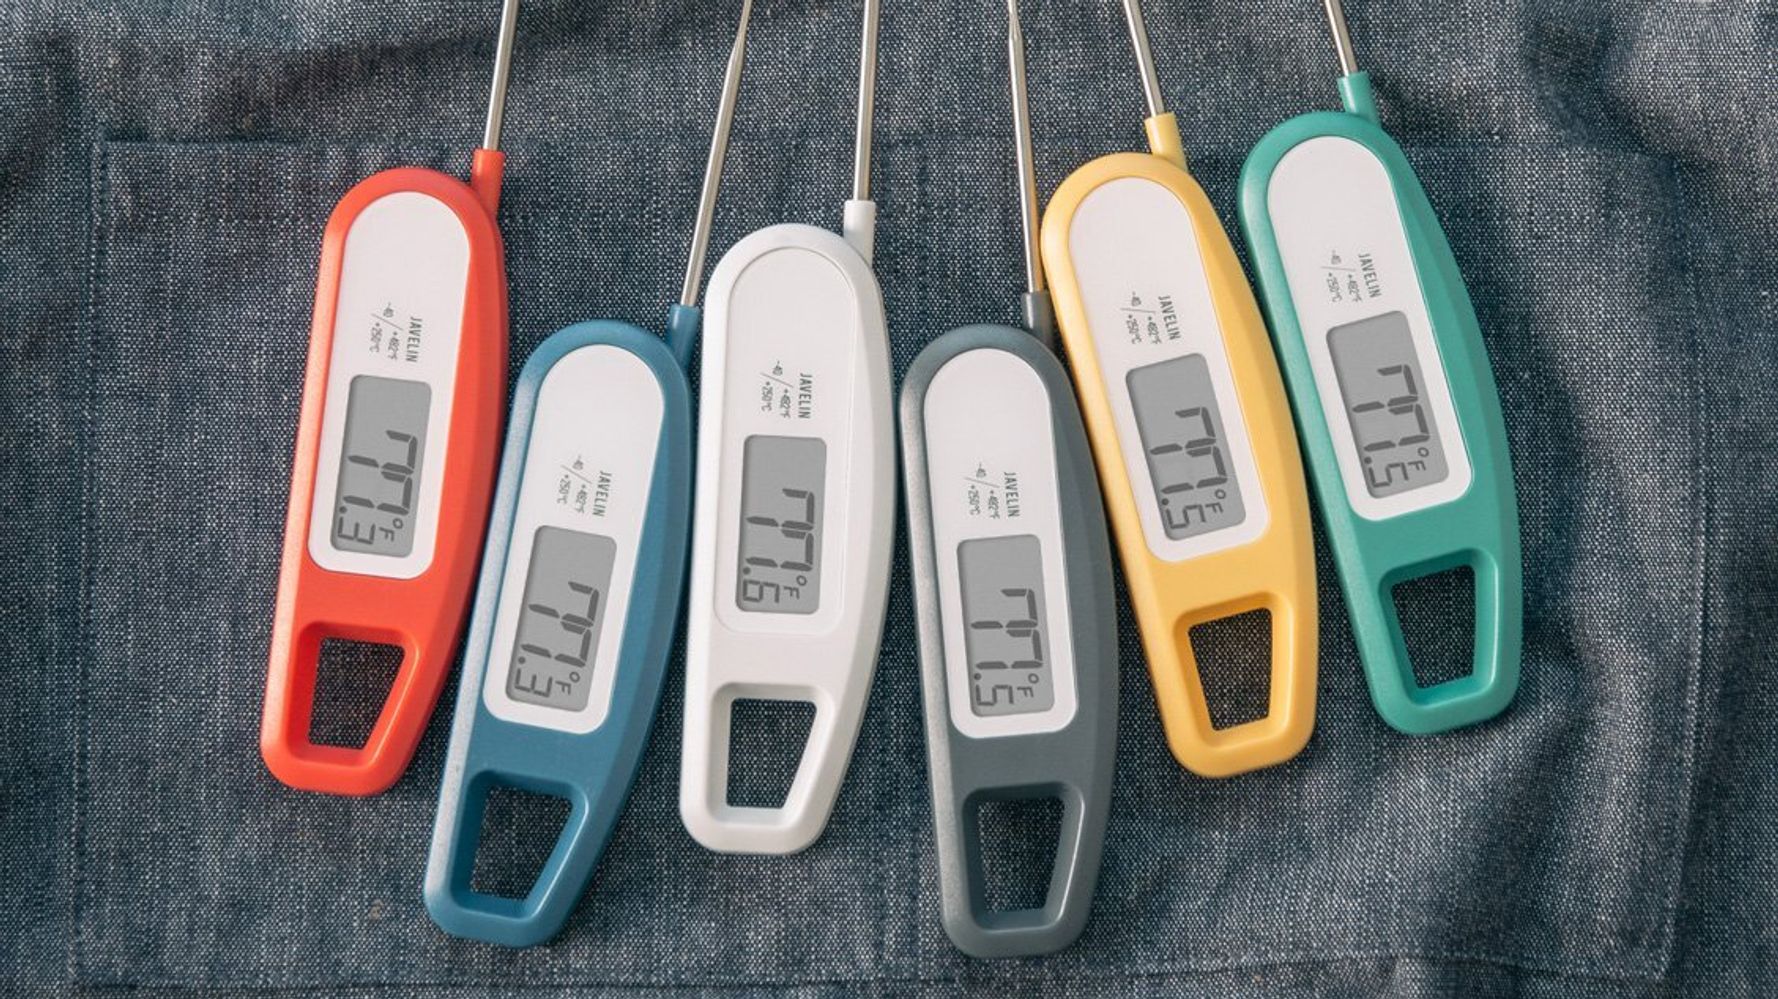 ThermoWorks: Save 30% on a top-rated meat thermometer today - Reviewed